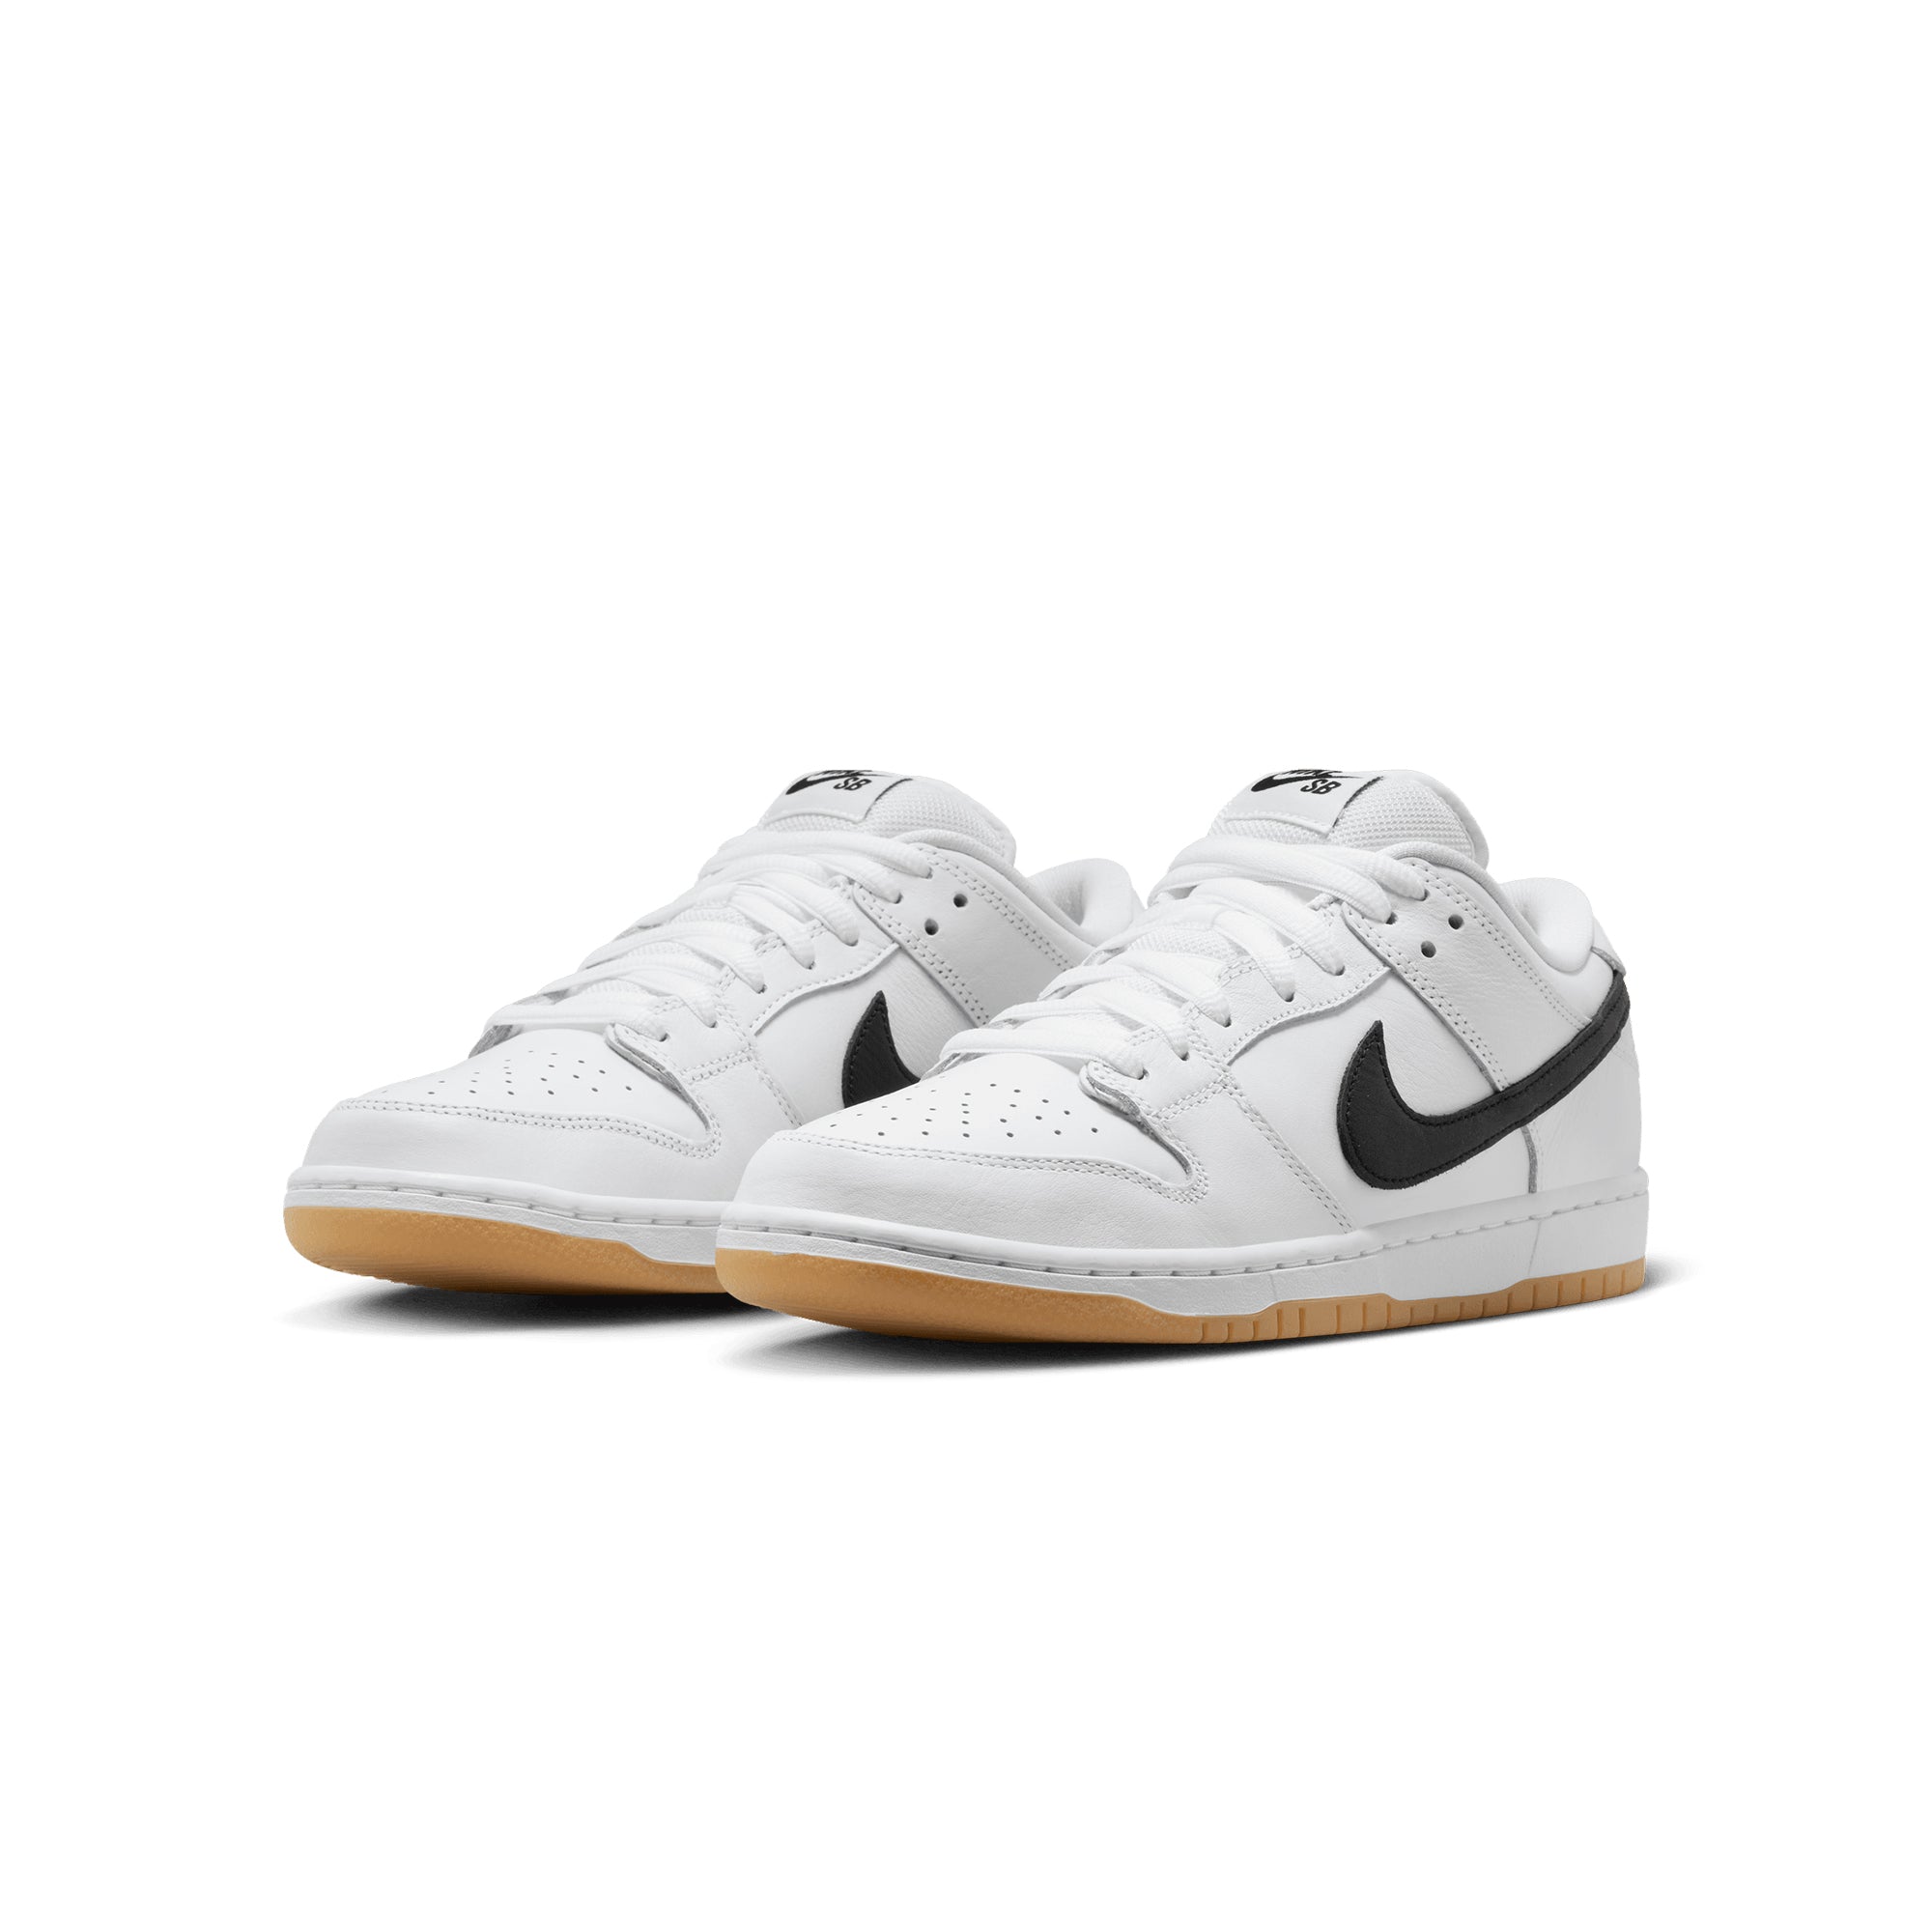 Nike SB Mens Dunk Low Pro Iso Shoes